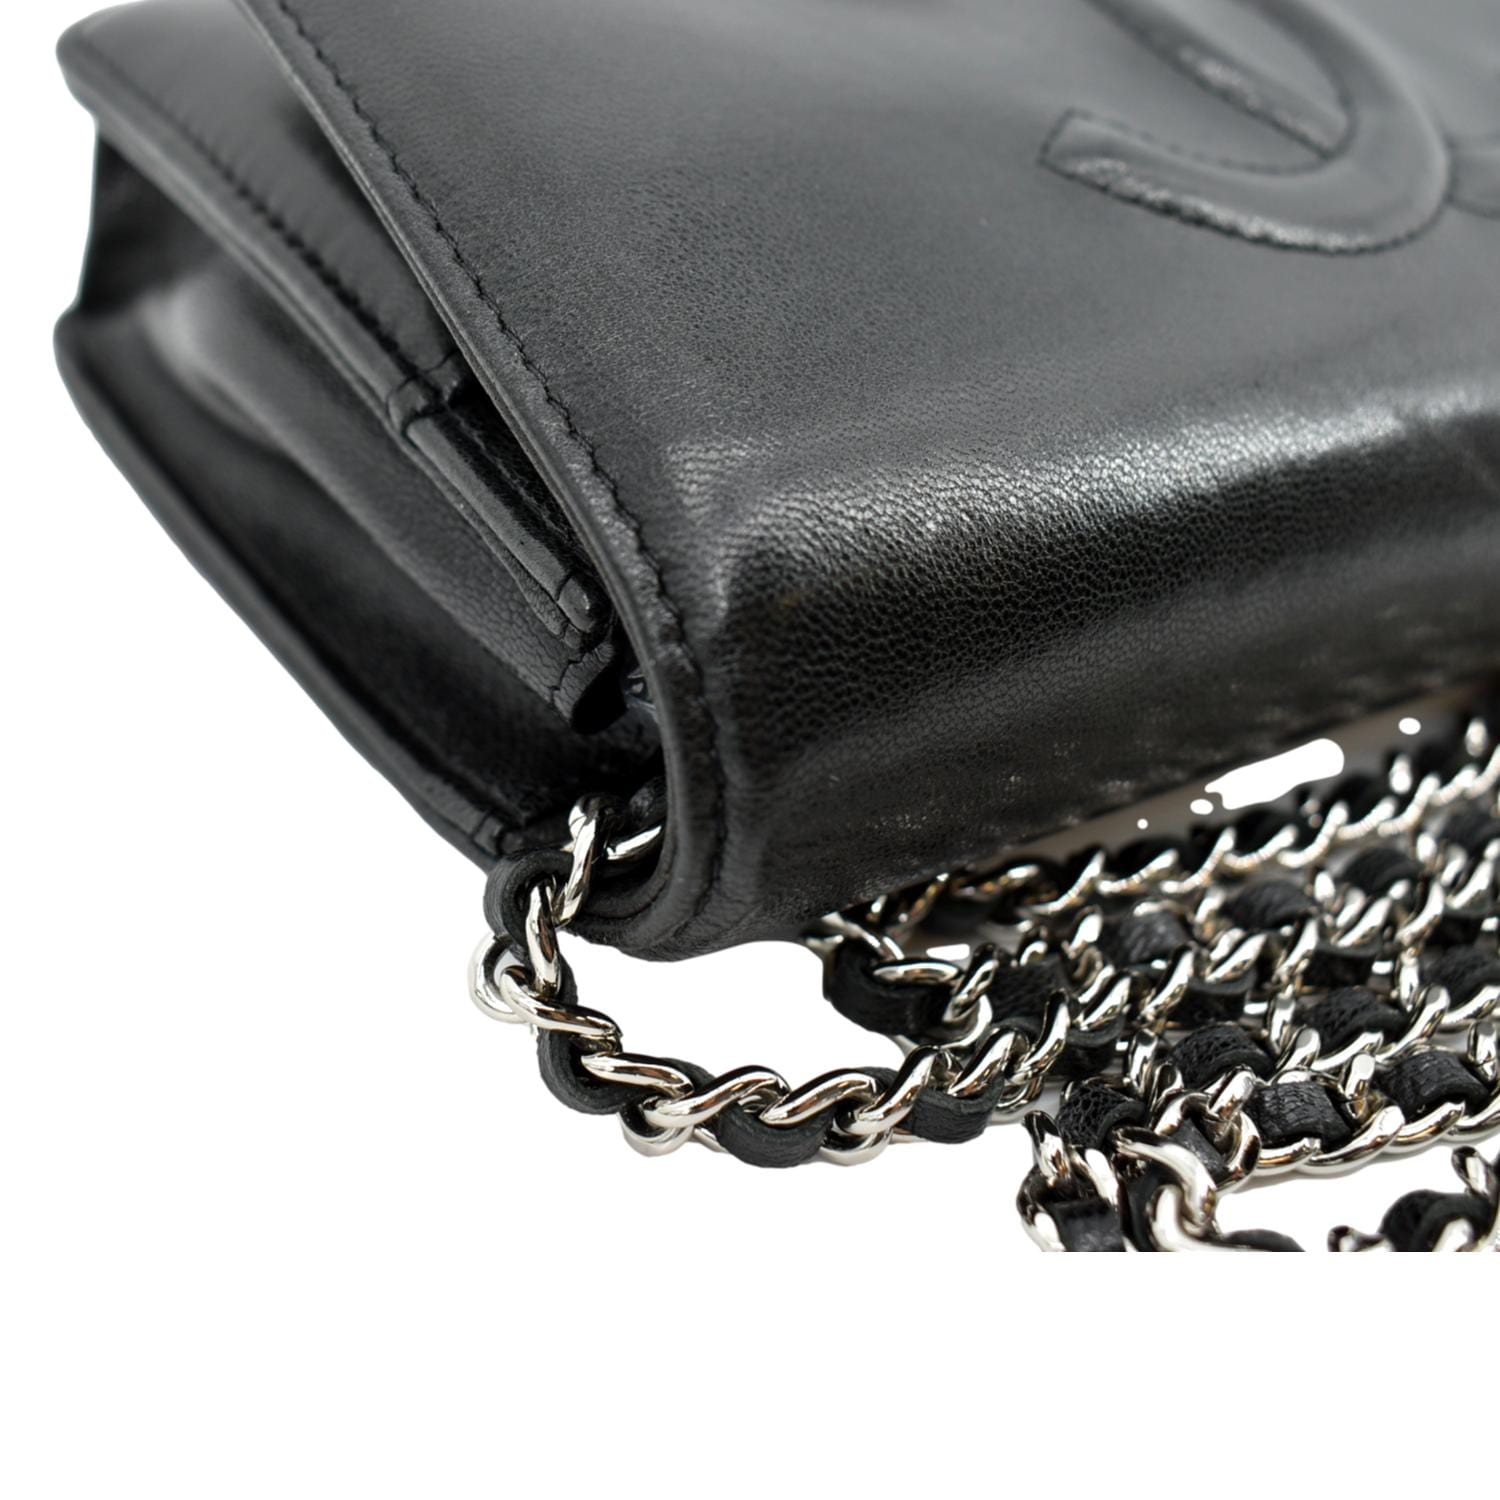 Wallet on chain timeless/classique patent leather crossbody bag